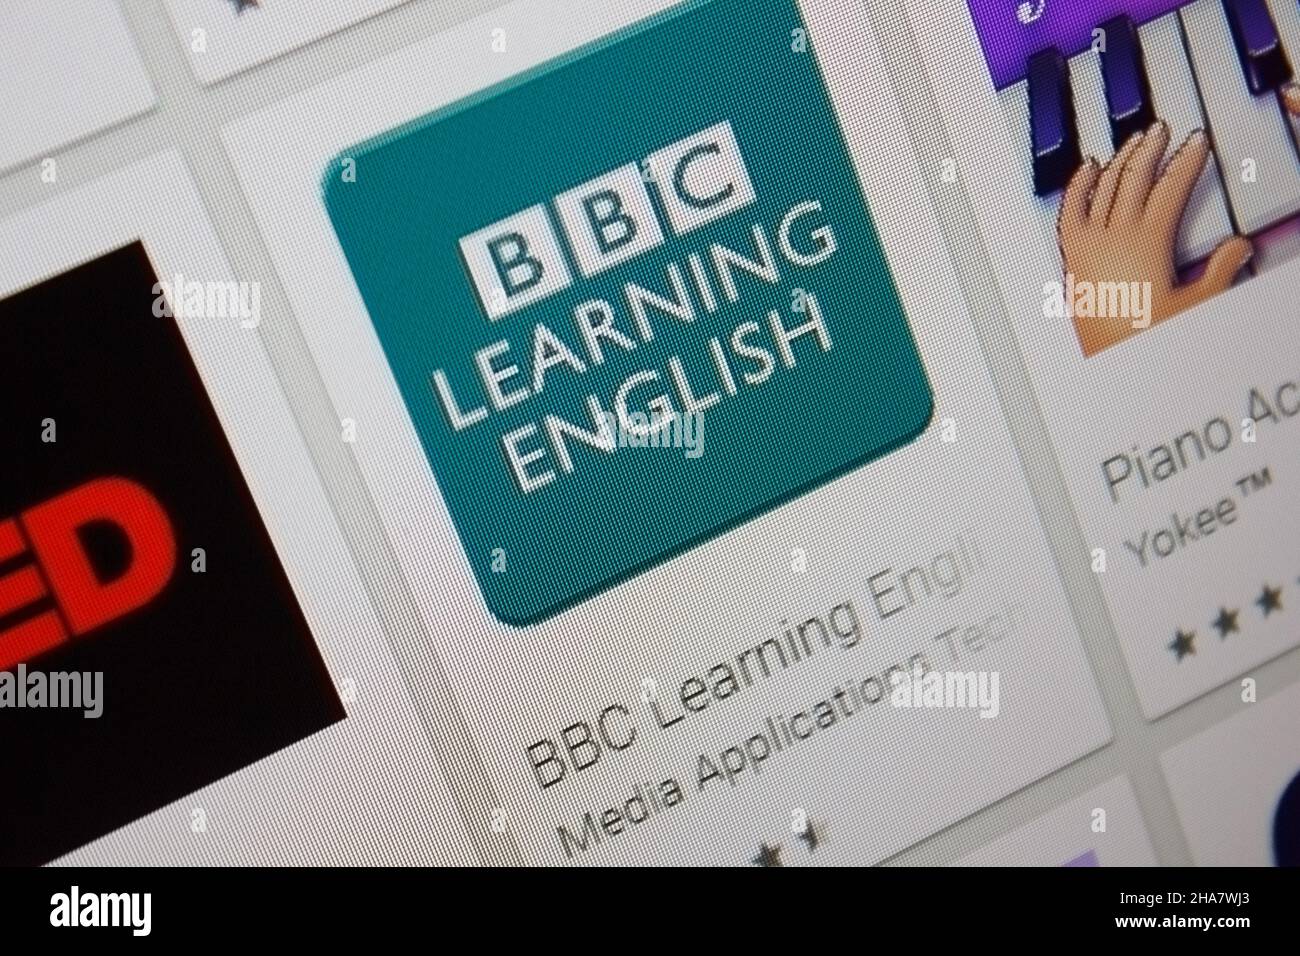 Ivanovsk, Russia - November 28, 2021: BBC Learning English app on the  display of tablet PC Stock Photo - Alamy